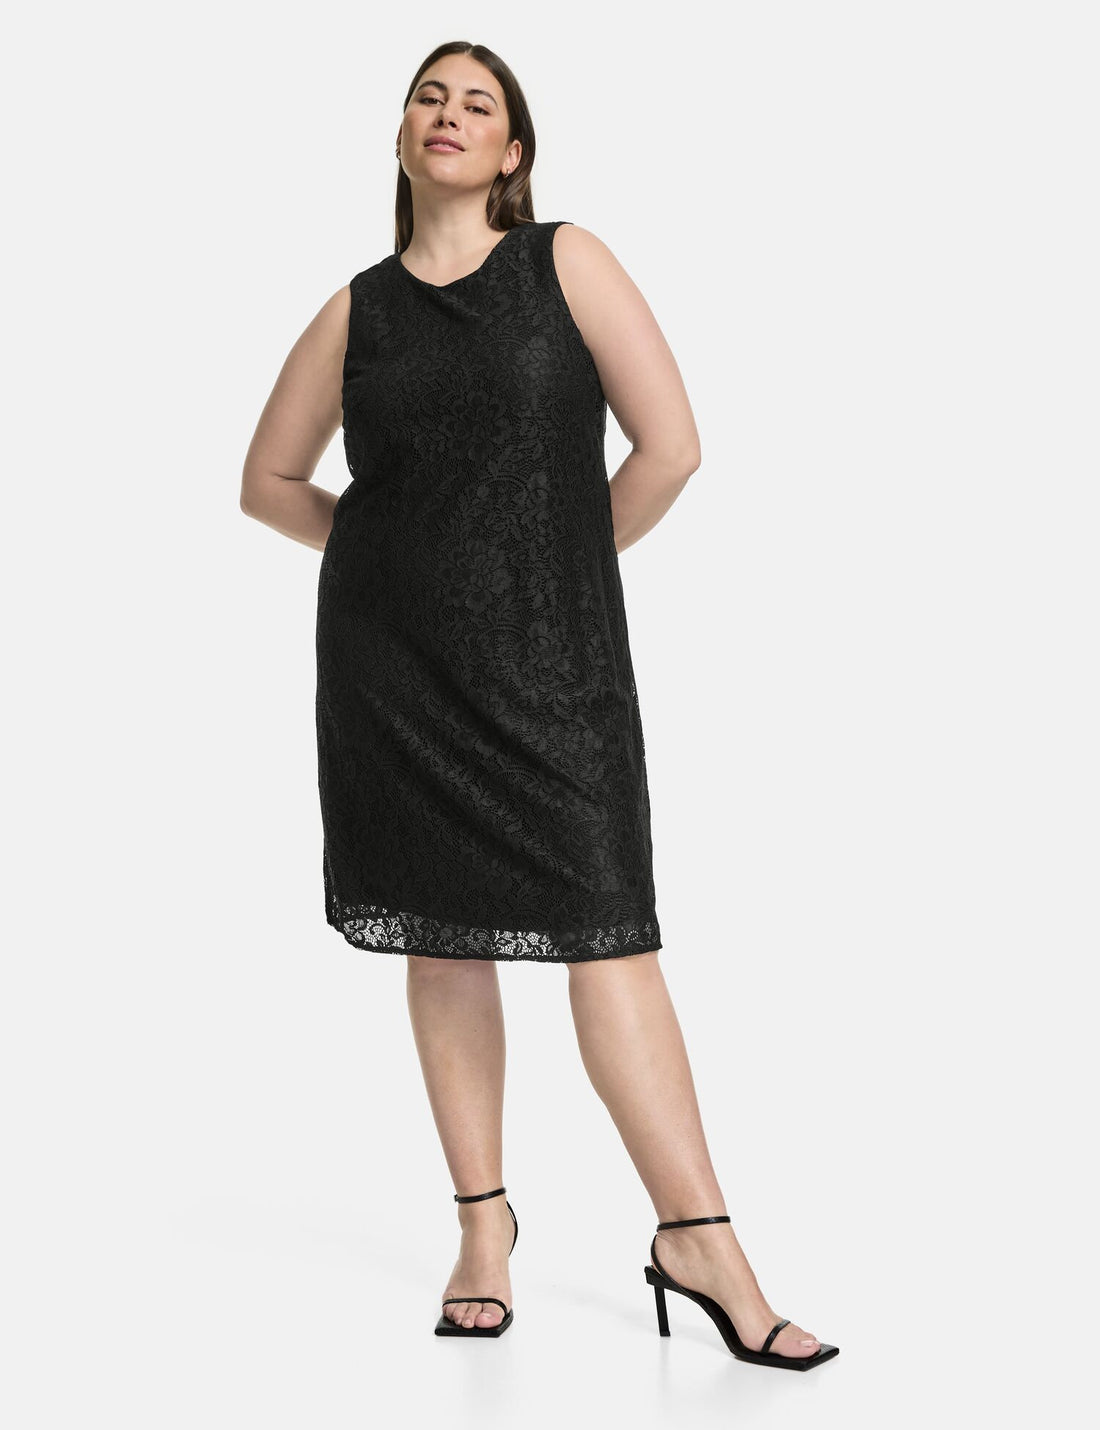 Sleeveless Lace Dress With Stretch For Comfort_480016-21056_1100_01